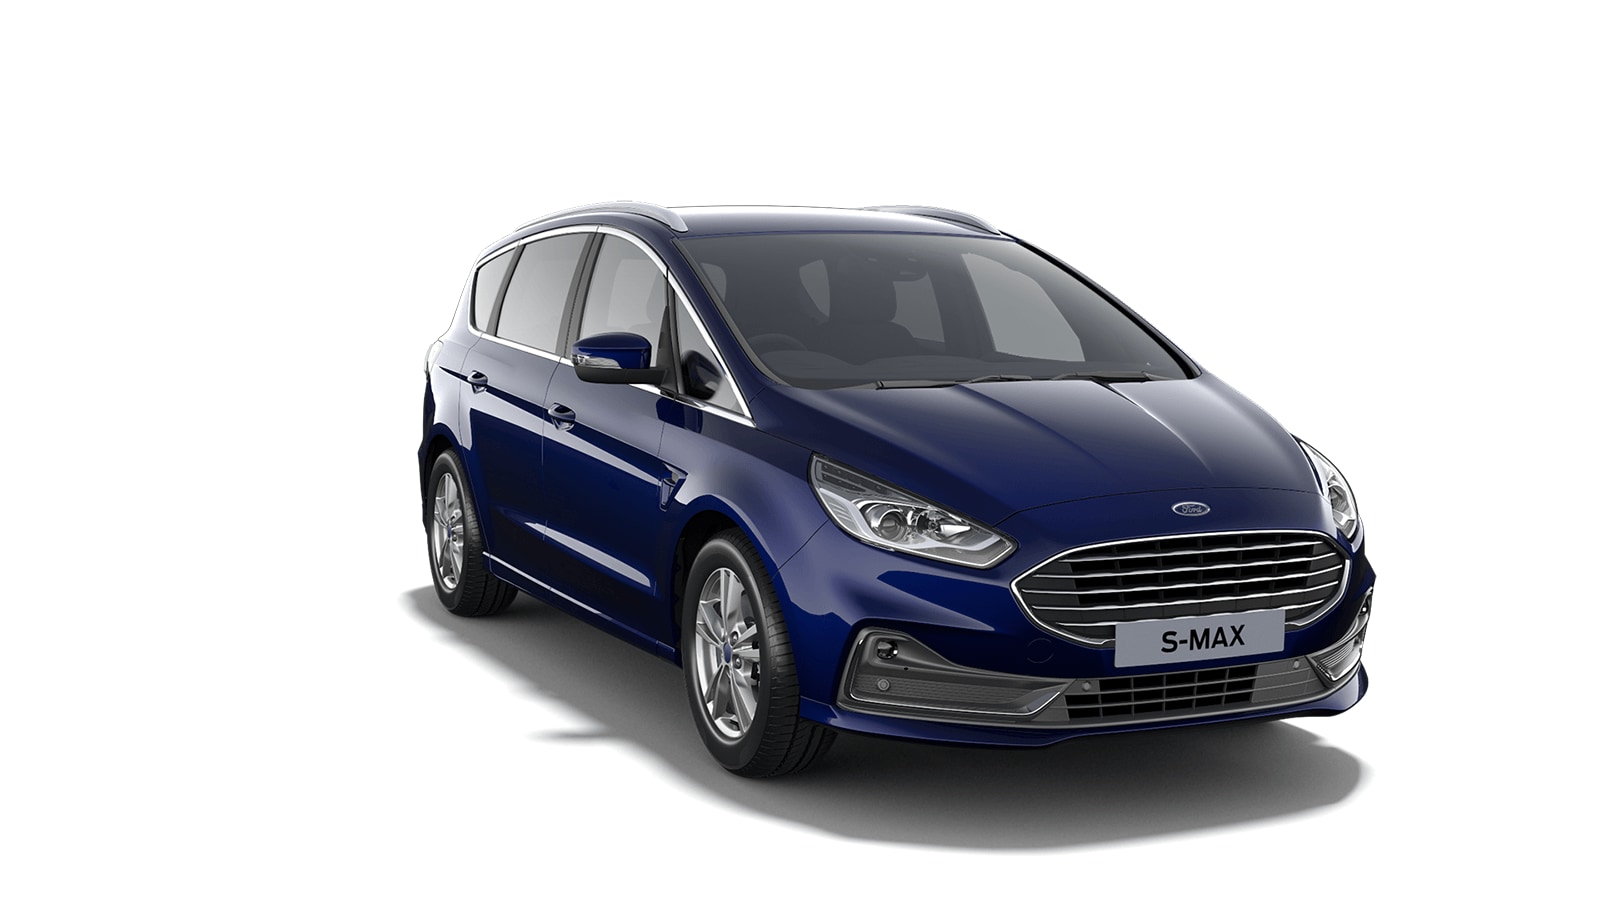 Ford S-MAX: Practical Family Car